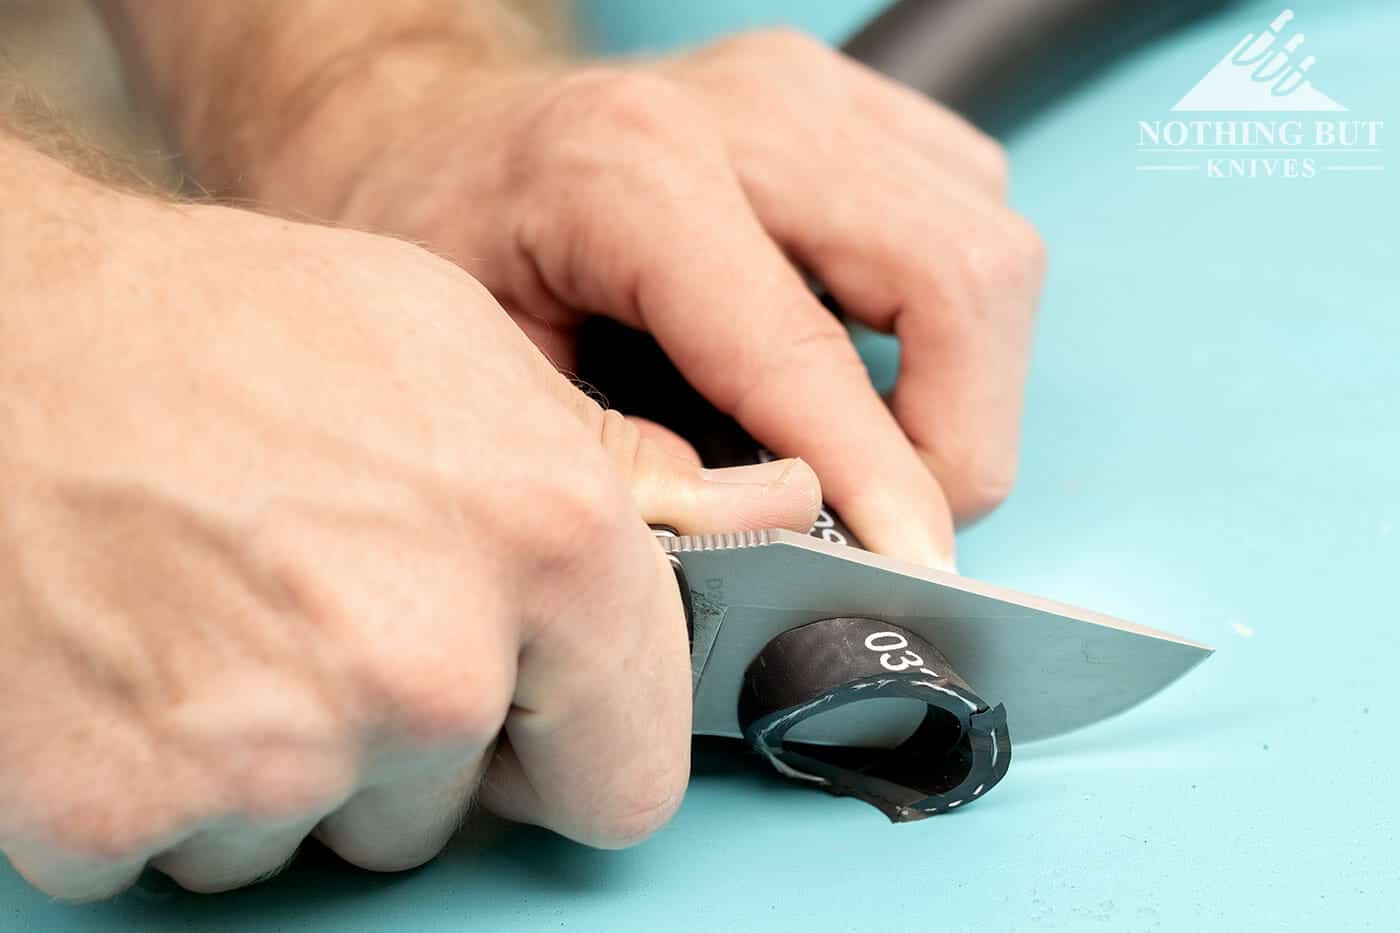 Cutting a thick rubber hose with a hard use pocket knife.